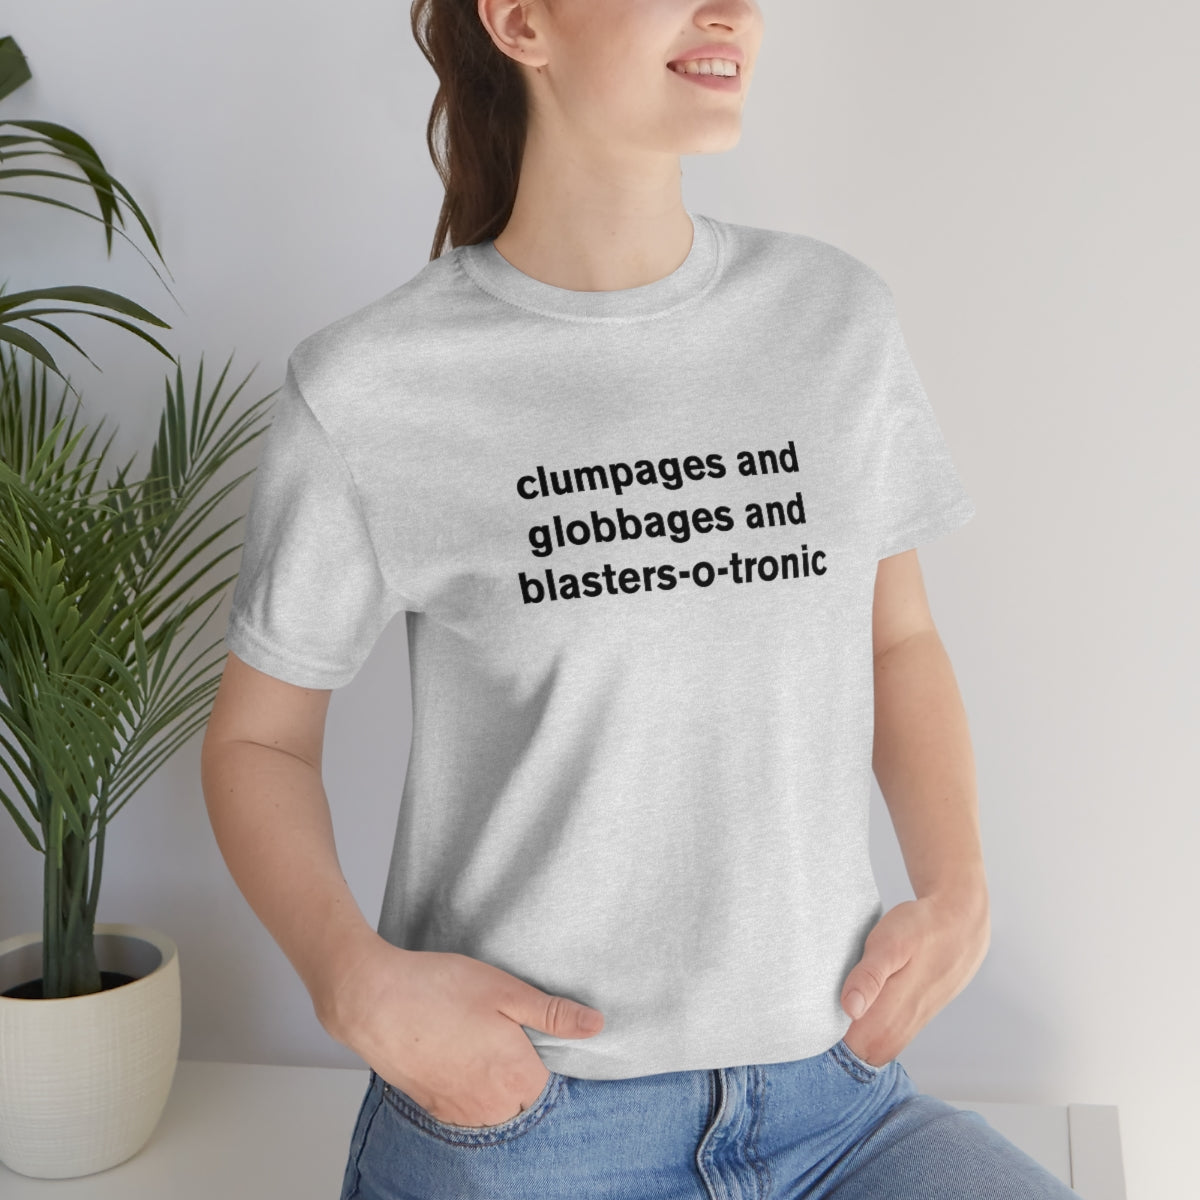 clumpages and globbages and blasters-o-tronic - t-shirt